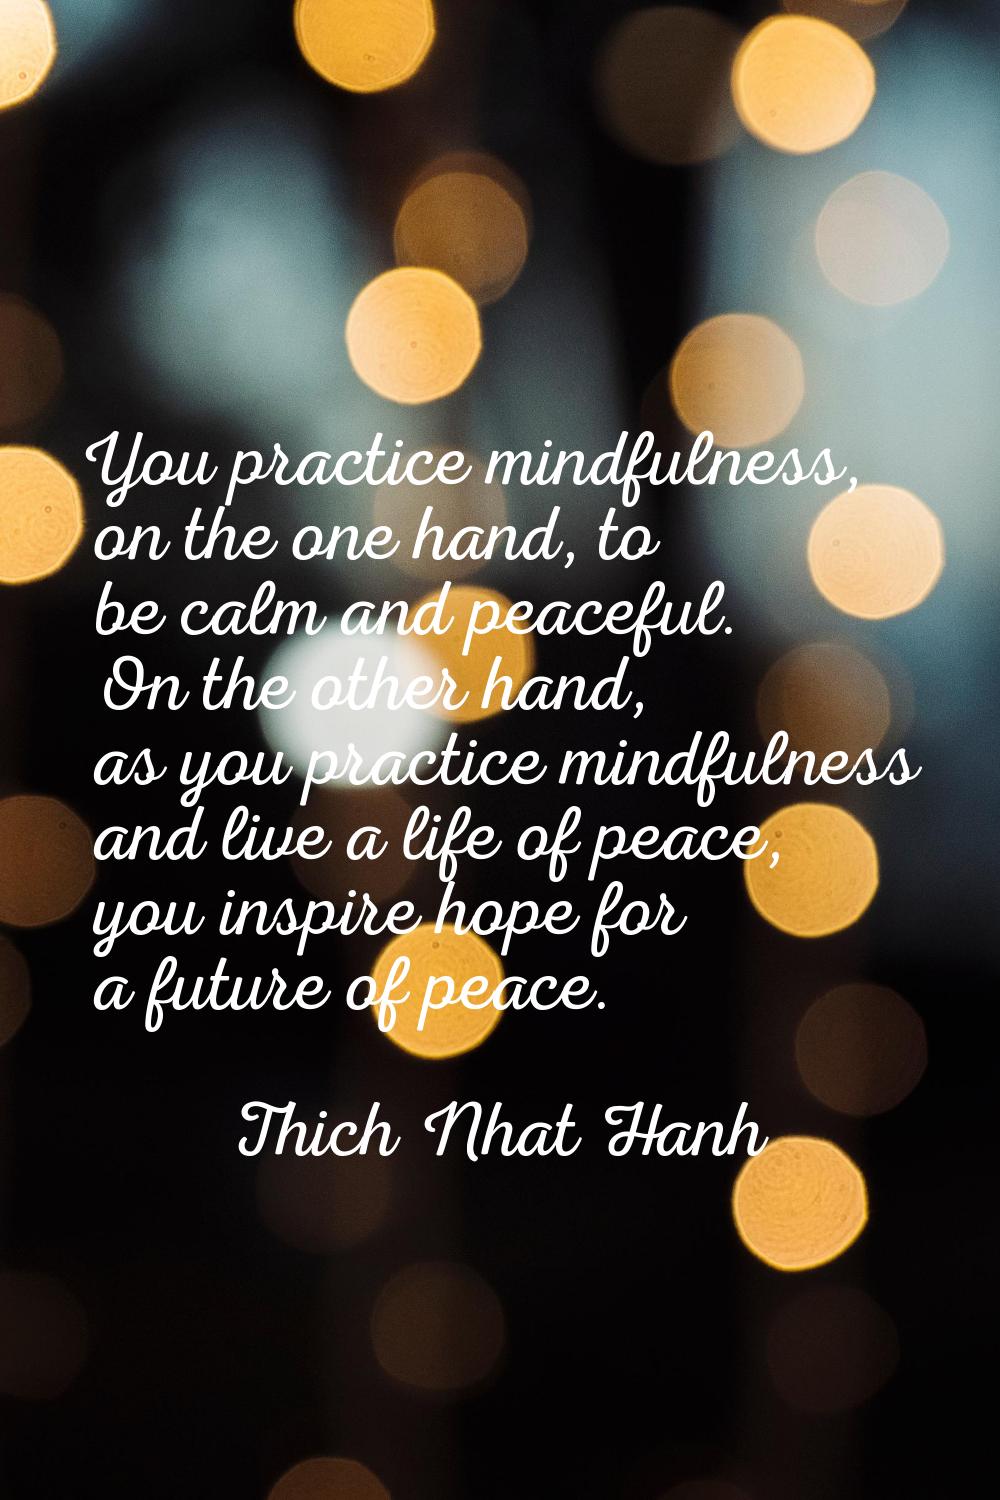 You practice mindfulness, on the one hand, to be calm and peaceful. On the other hand, as you pract